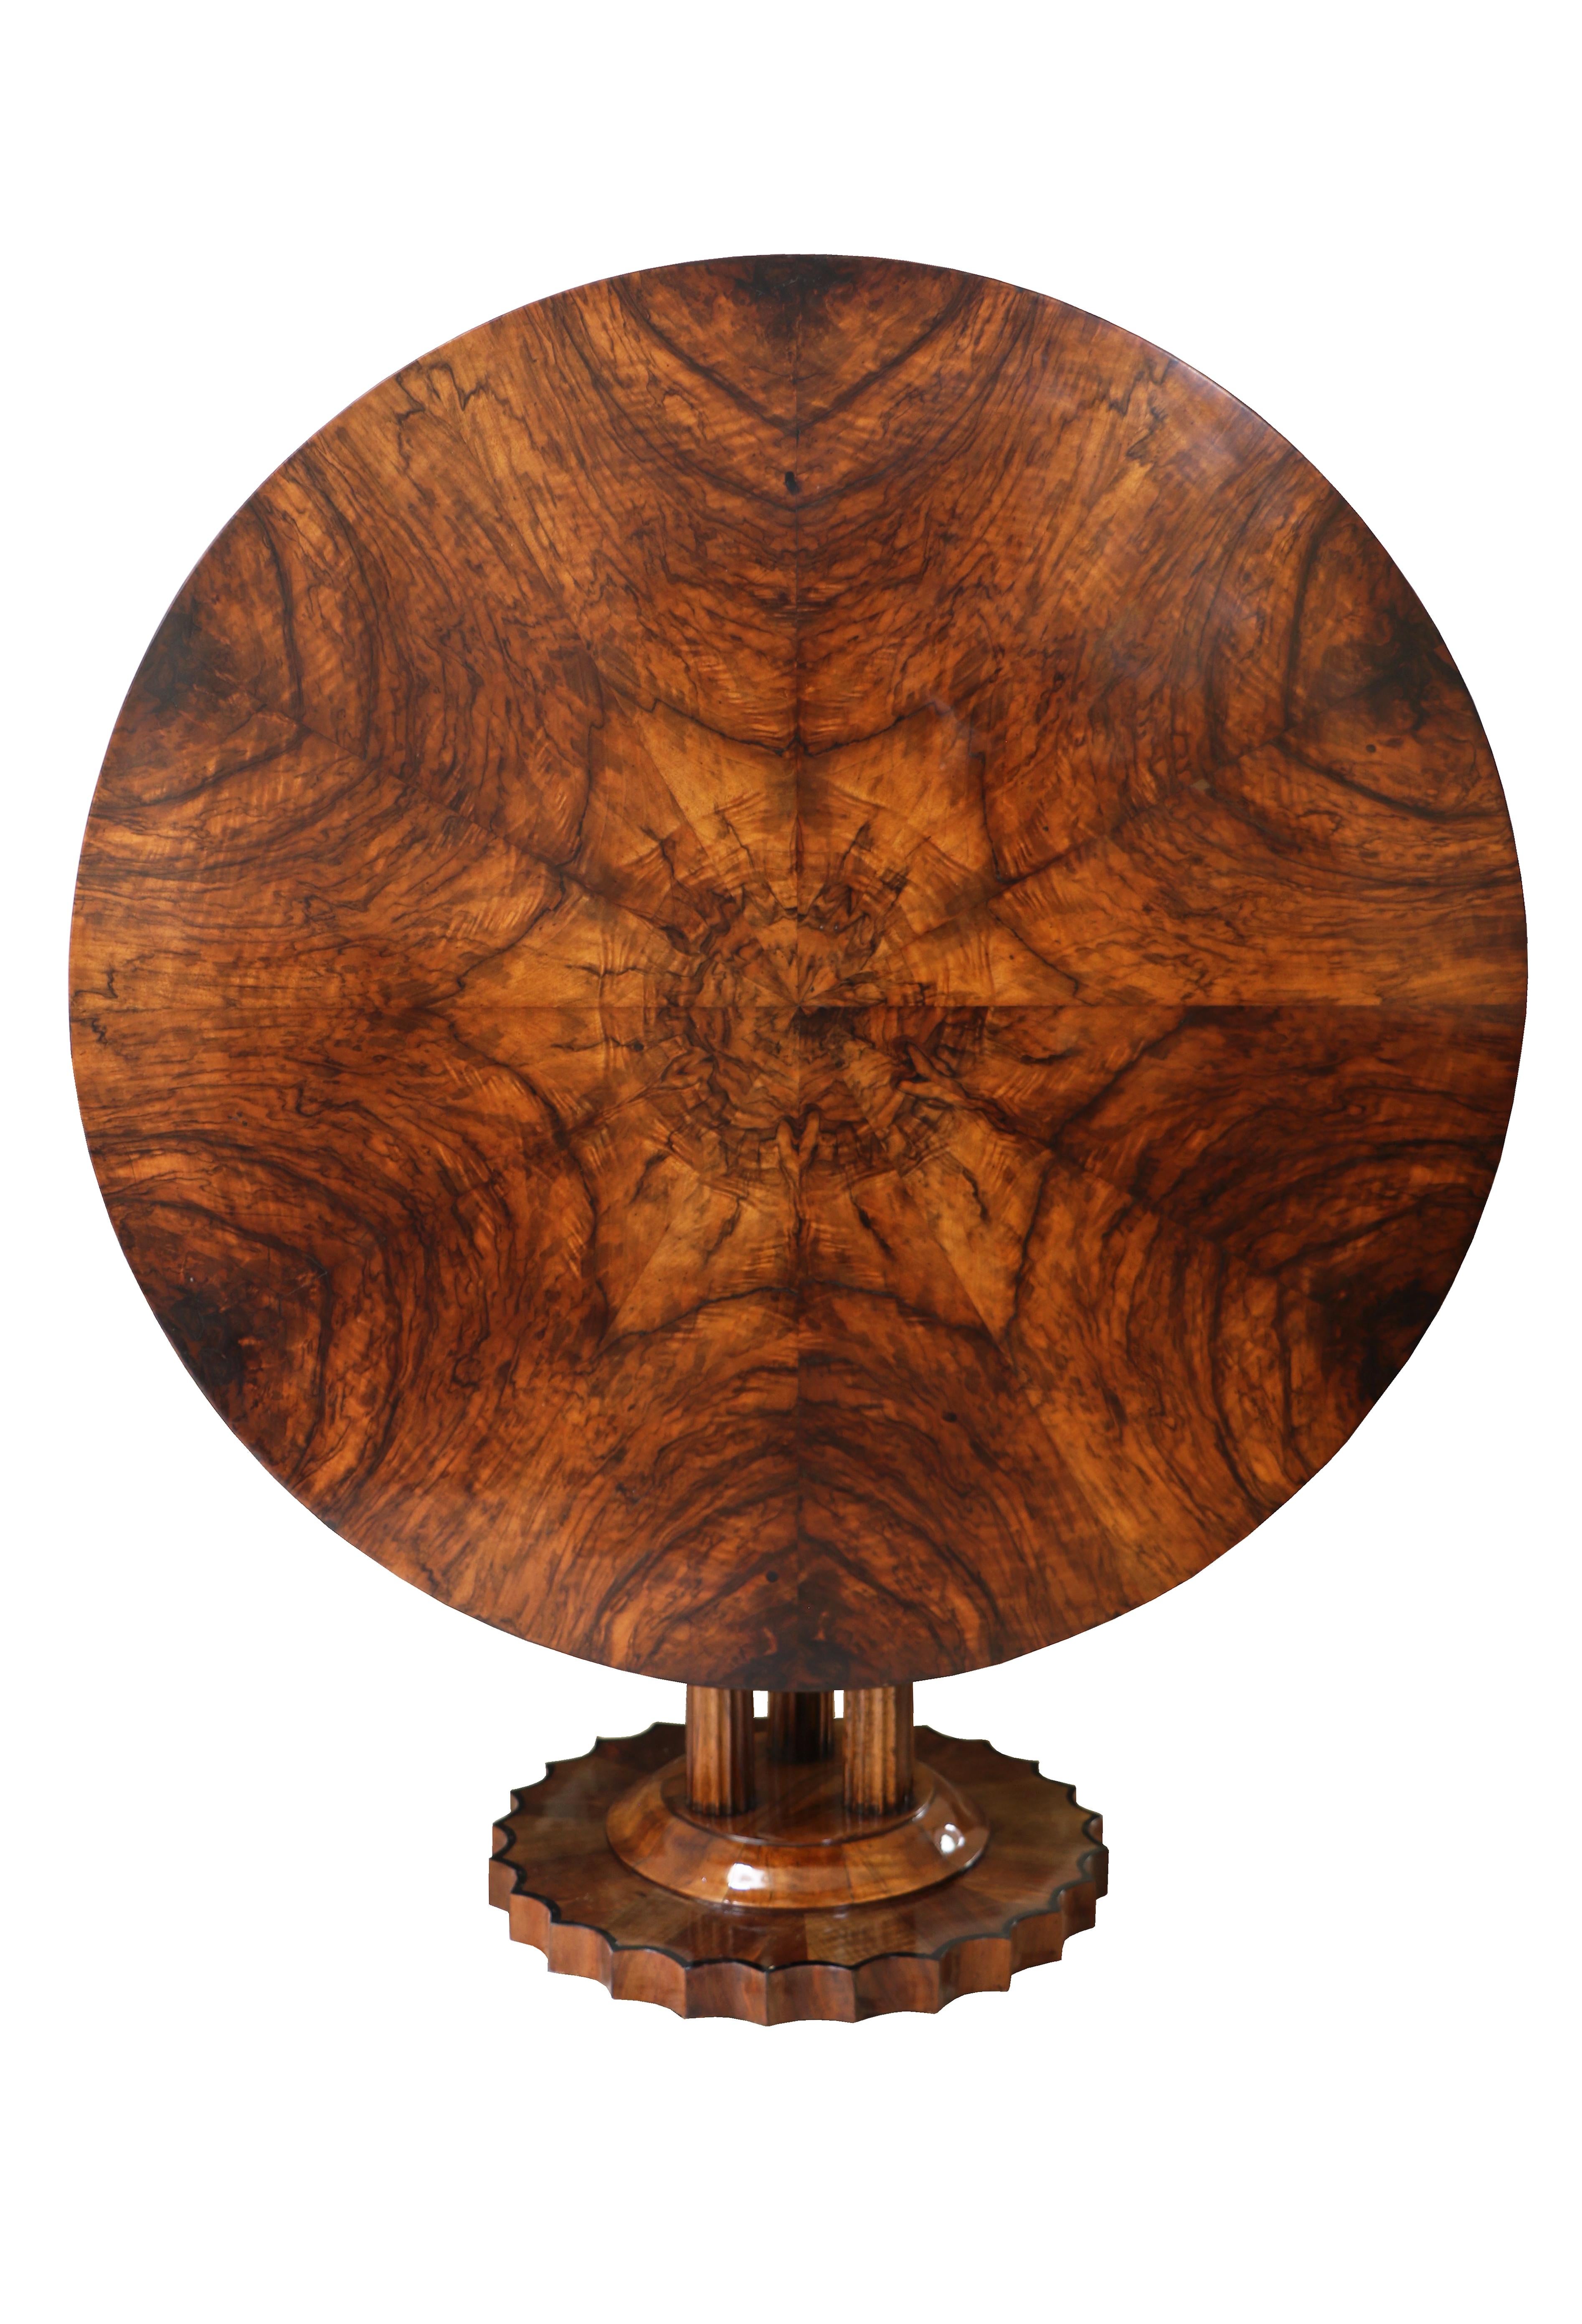 Hello,

This exceptional, large Biedermeier walnut table was made circa 1825 in Vienna.

Viennese Biedermeier pieces are distinguished by their sophisticated proportions, rare and refined design, excellent craftsmanship and continue to have a great